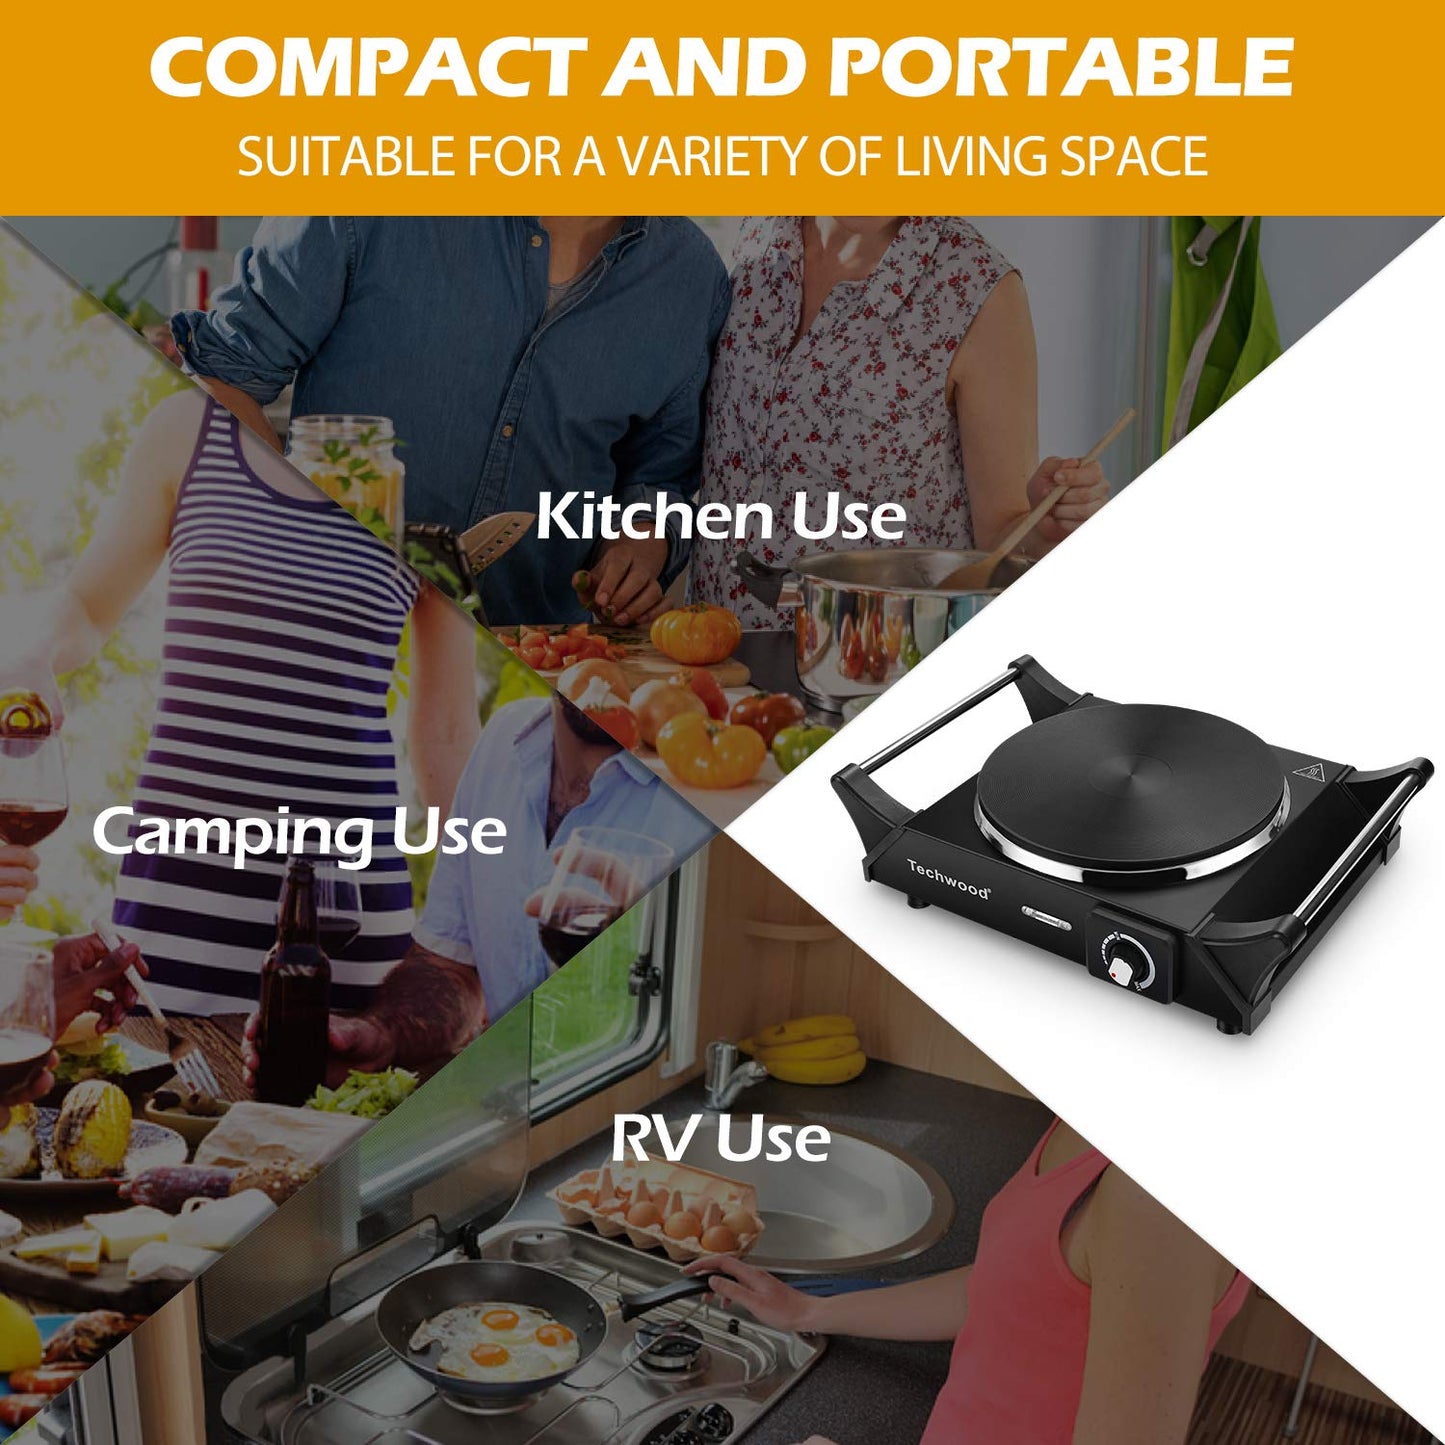 Hot Plate, Techwood Electric Stove for Cooking, 1500W Countertop Single Burner with Adjustable Temperature